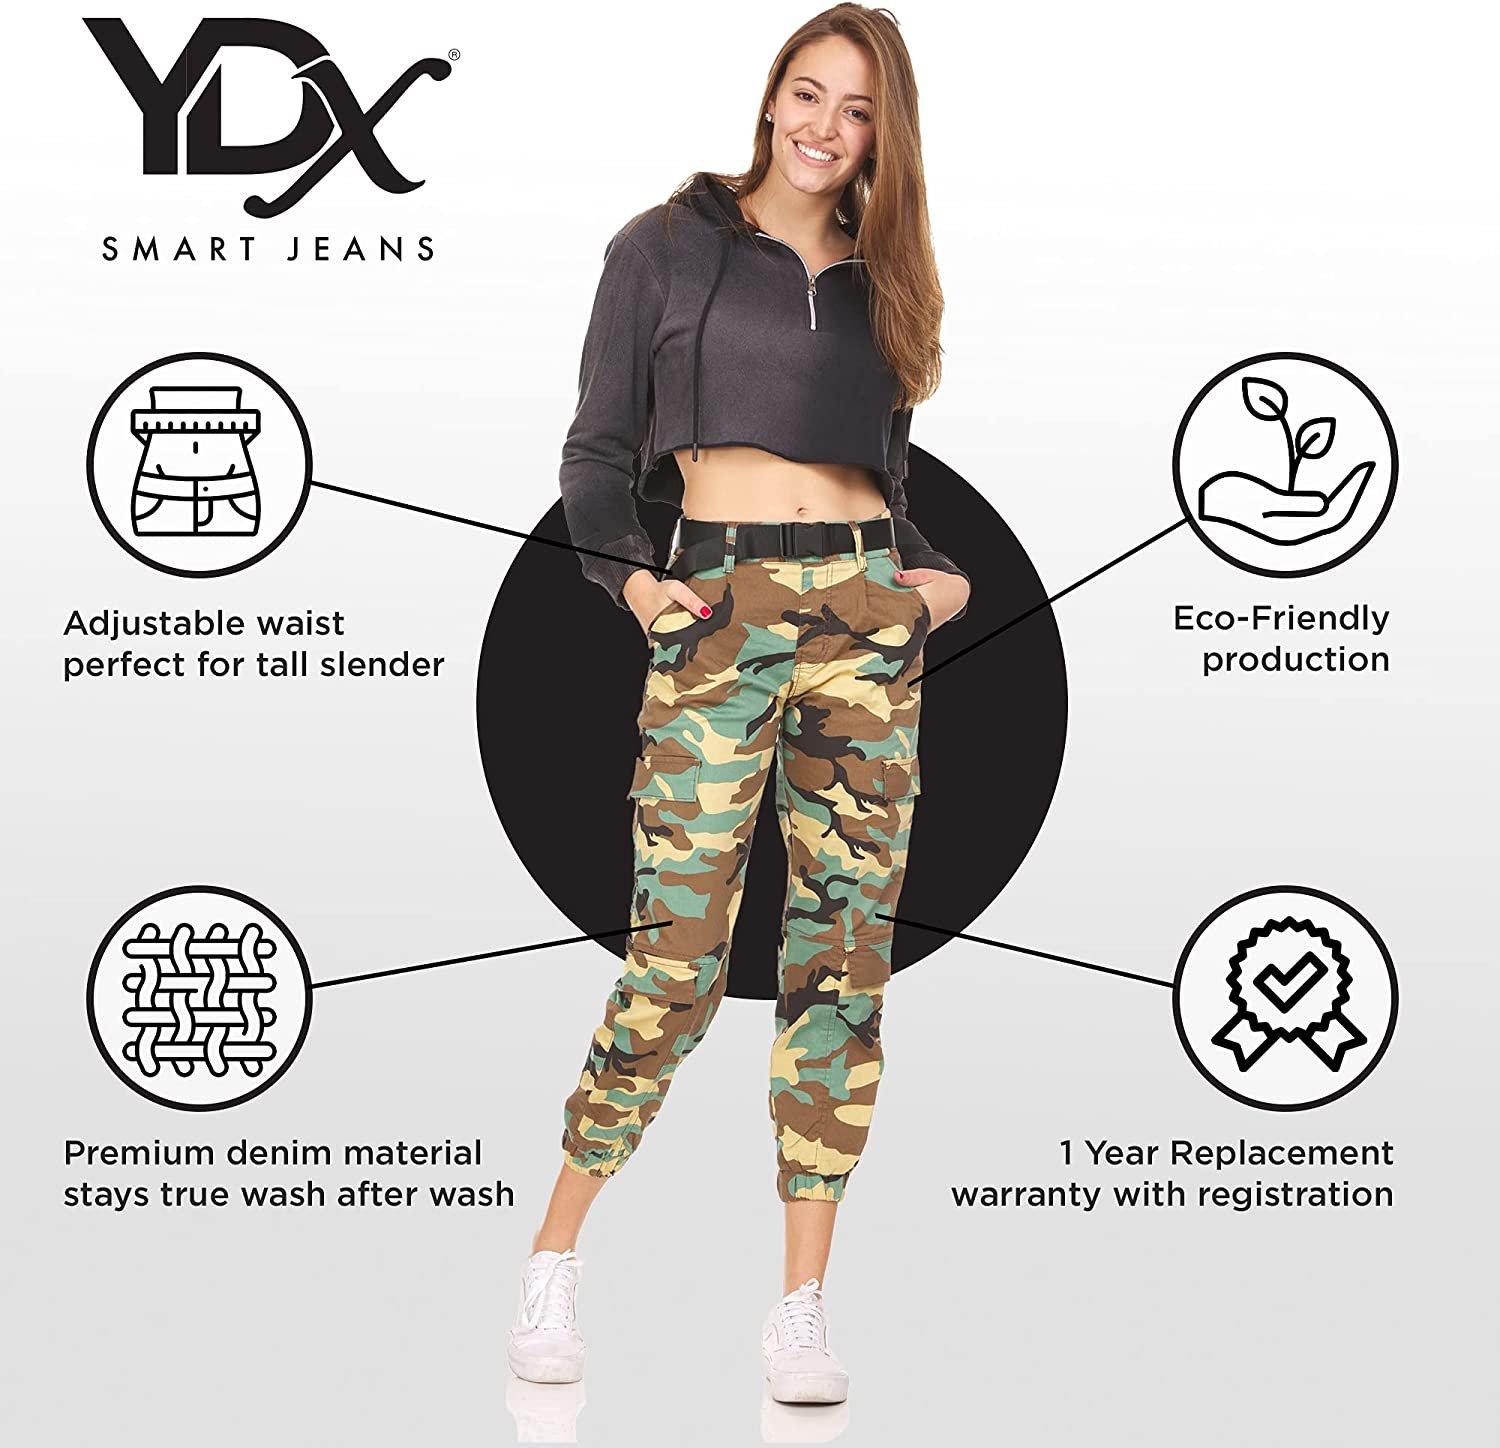 YDX Teen Girls's Twill Stretchy Jogger Pants, Sand Camo w/Belt, 1 - image 4 of 7